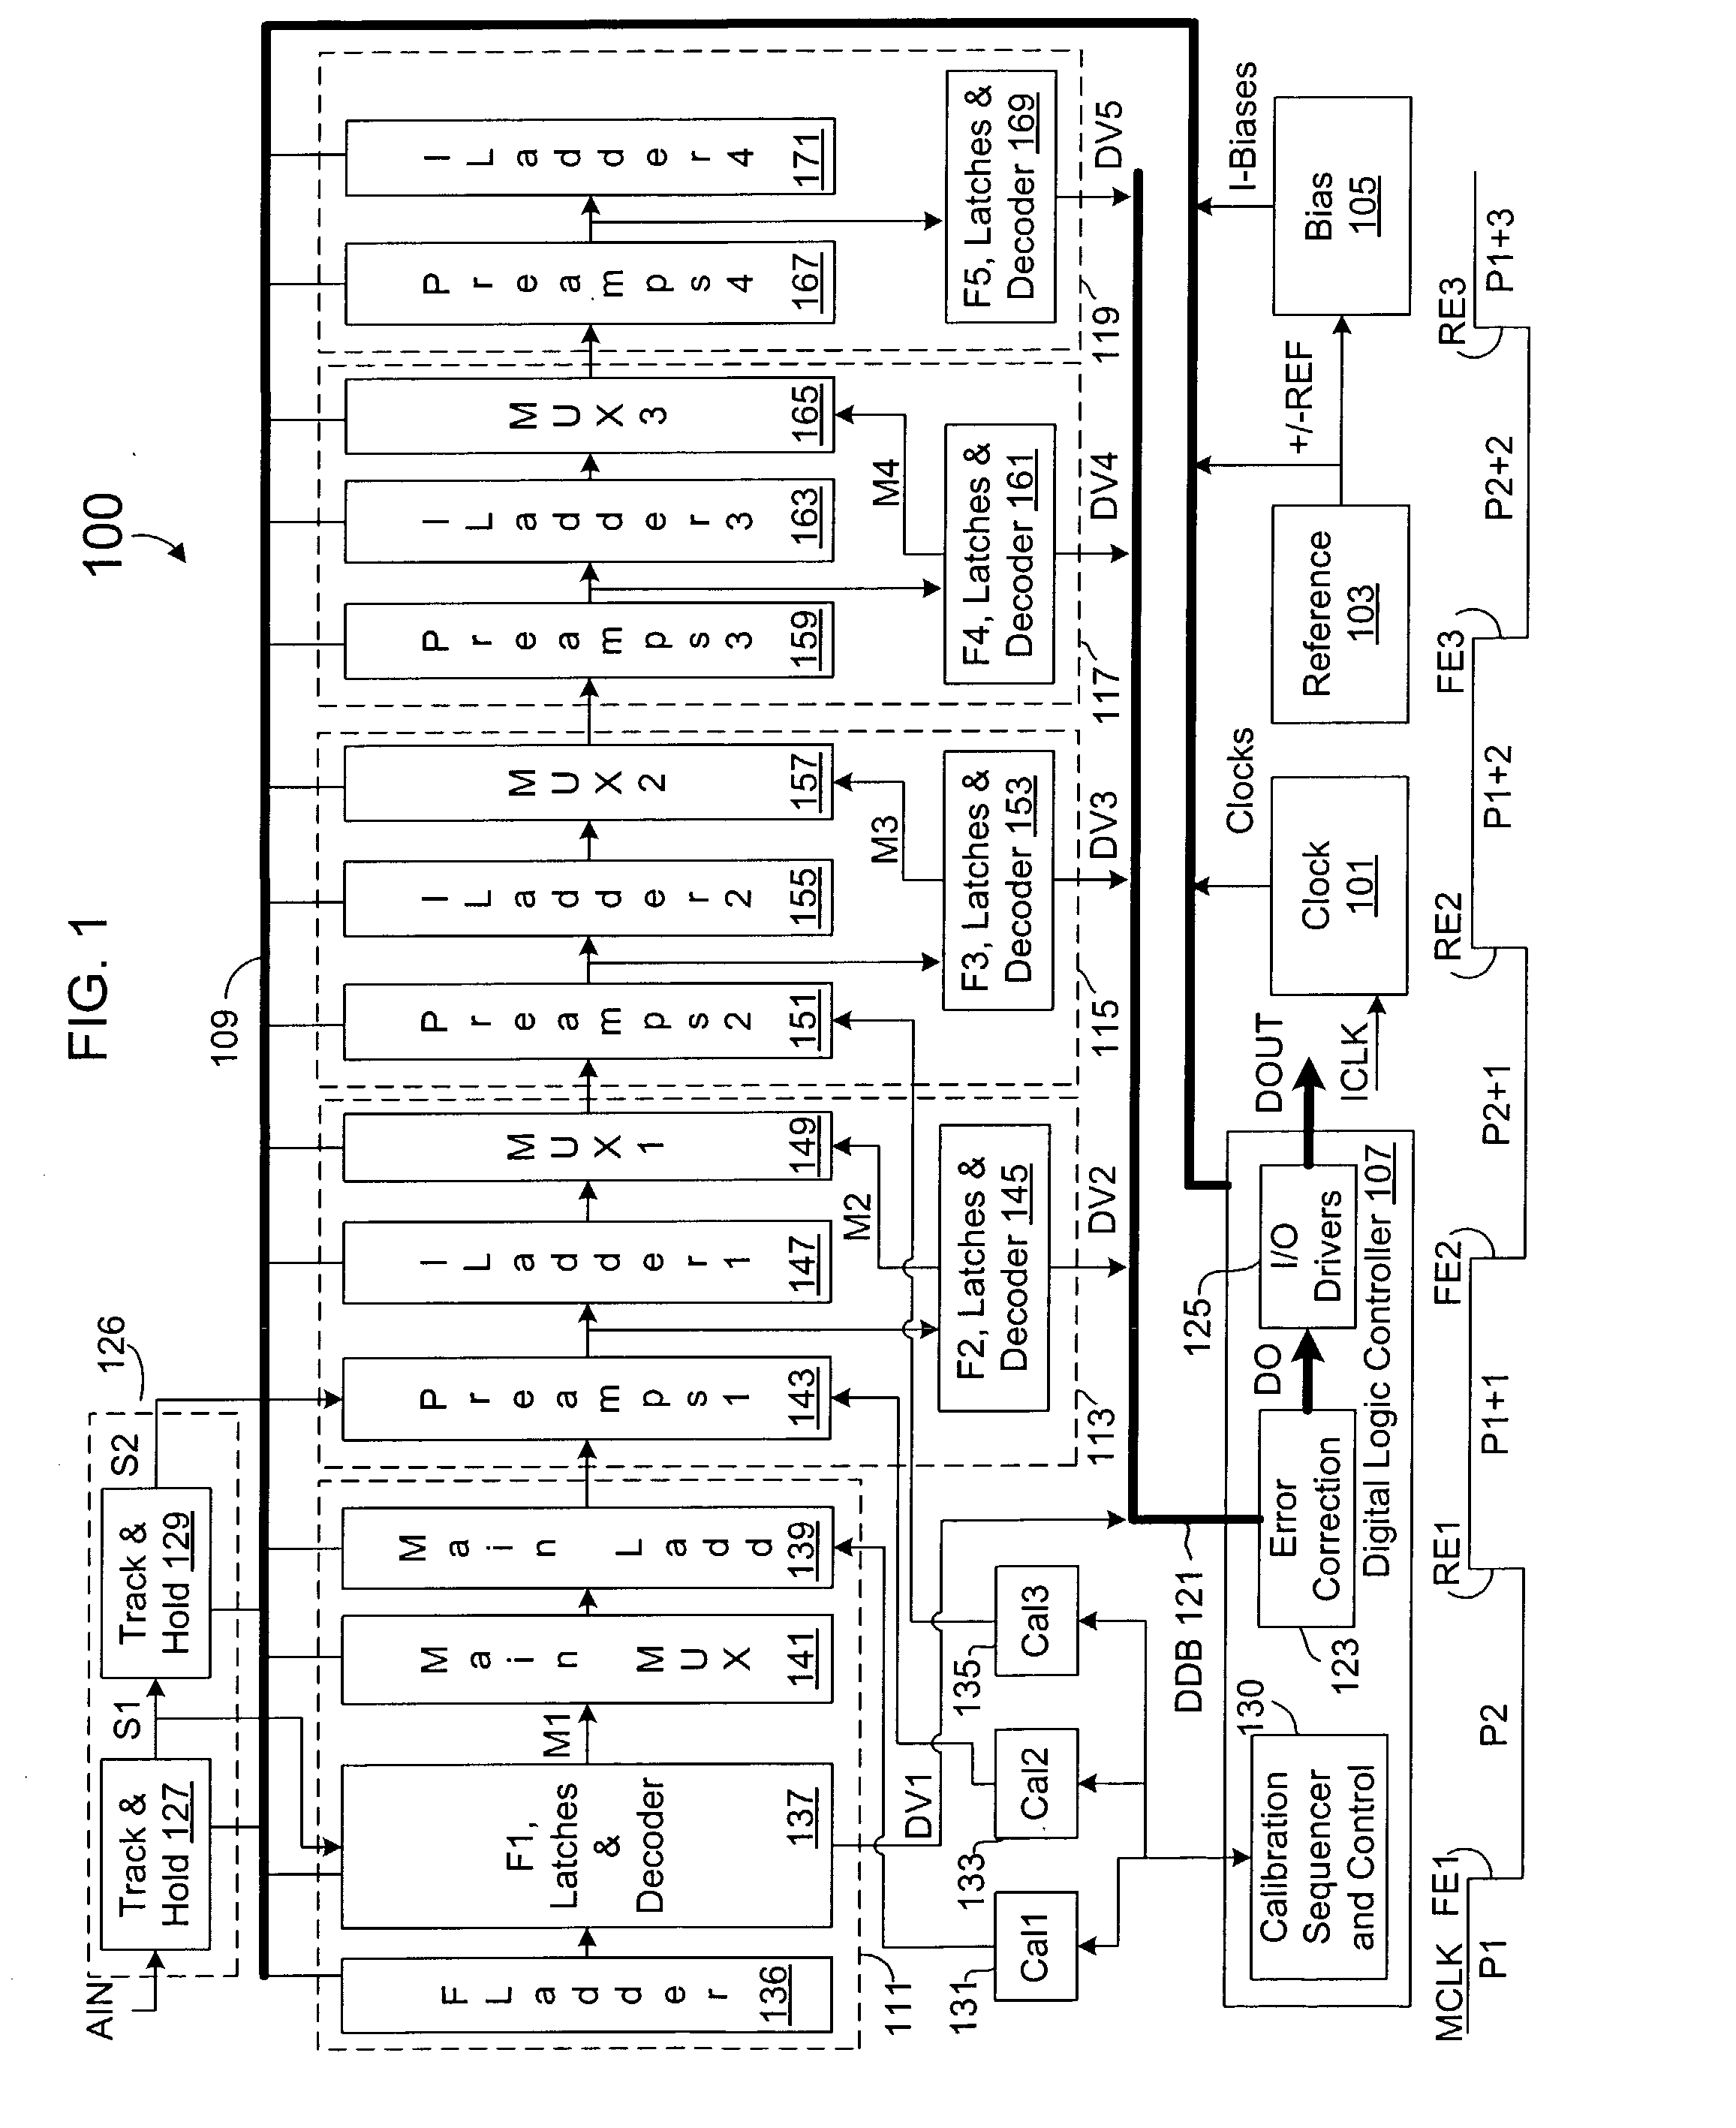 Calibration of resistor ladder using difference measurement and parallel resistive correction